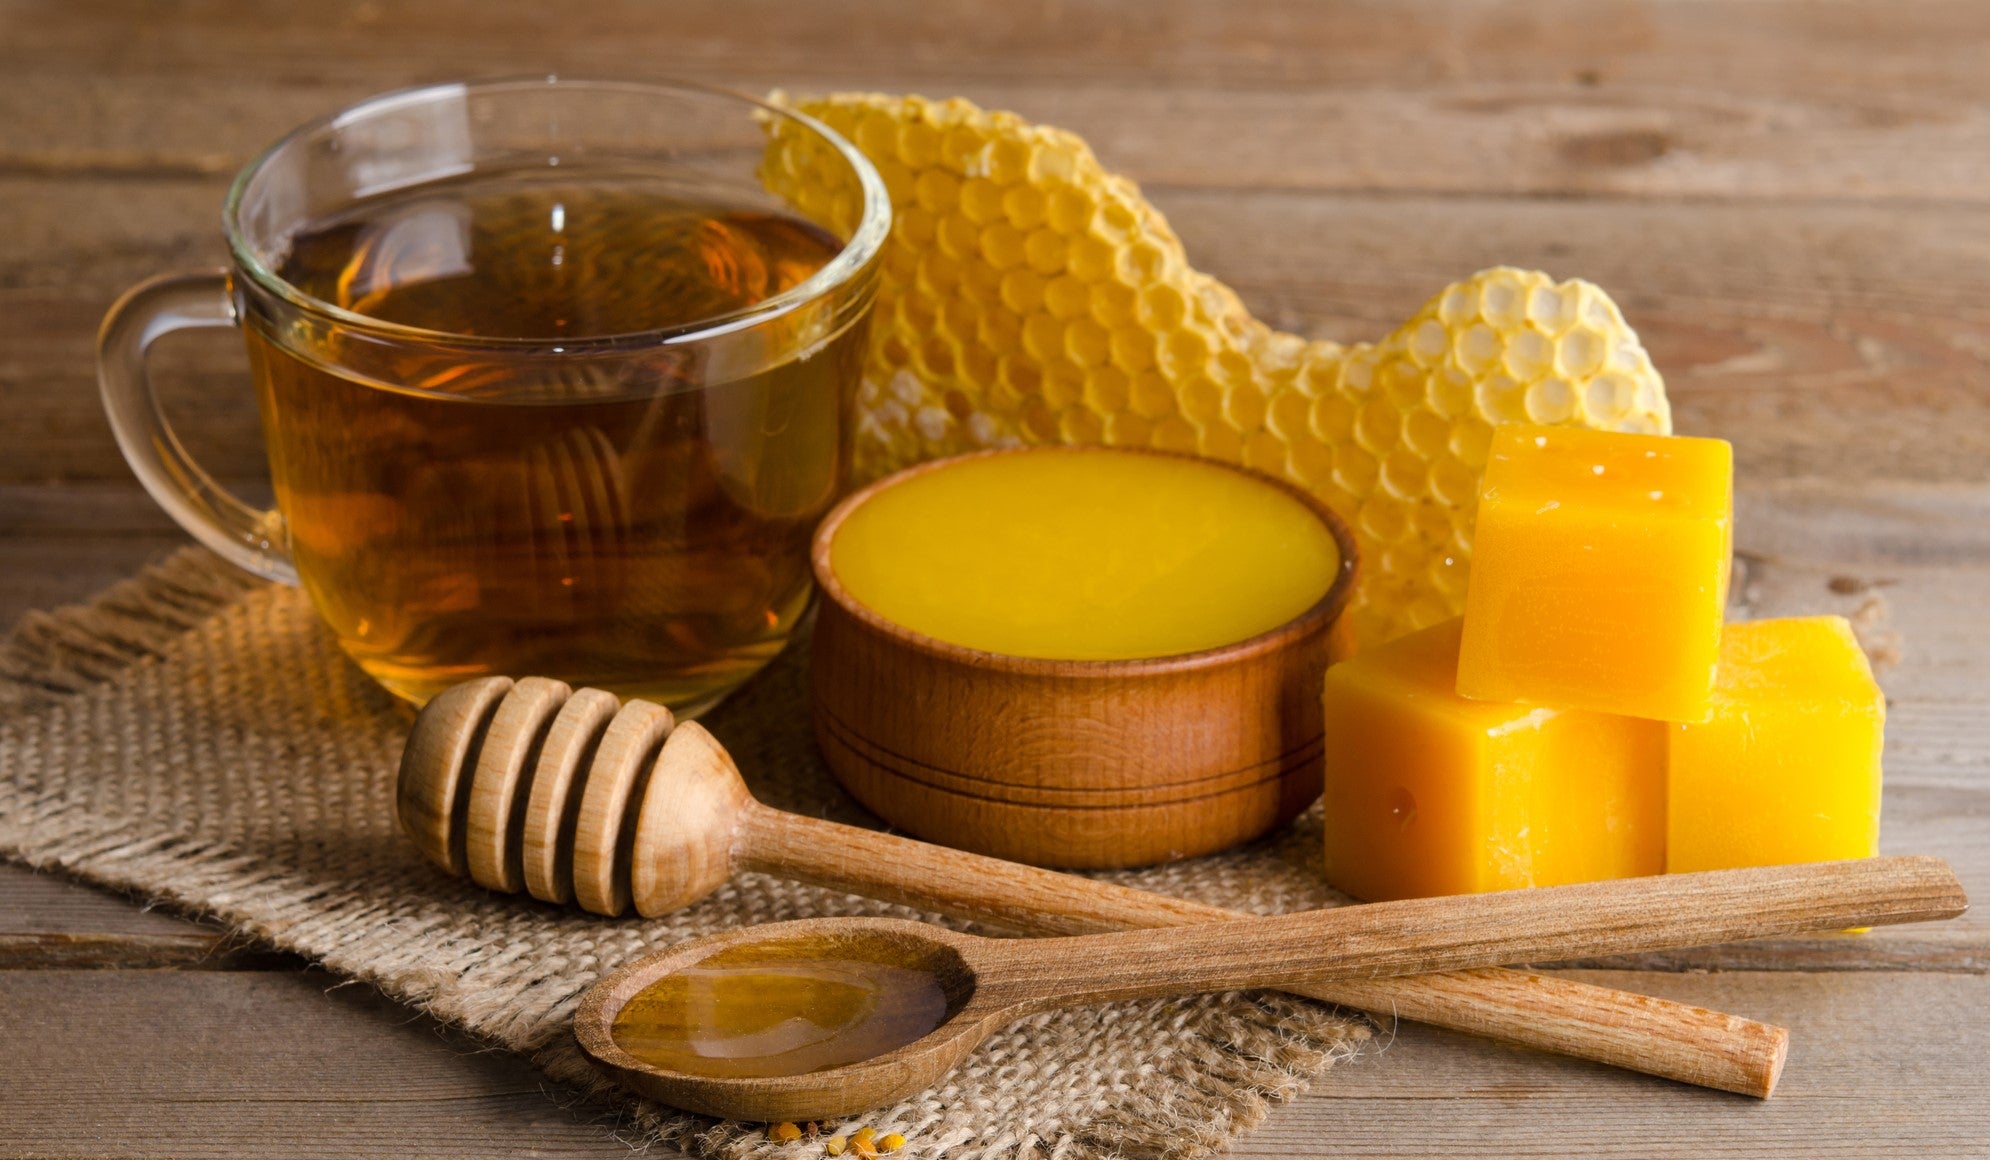 Beeswax for Skin Care Products